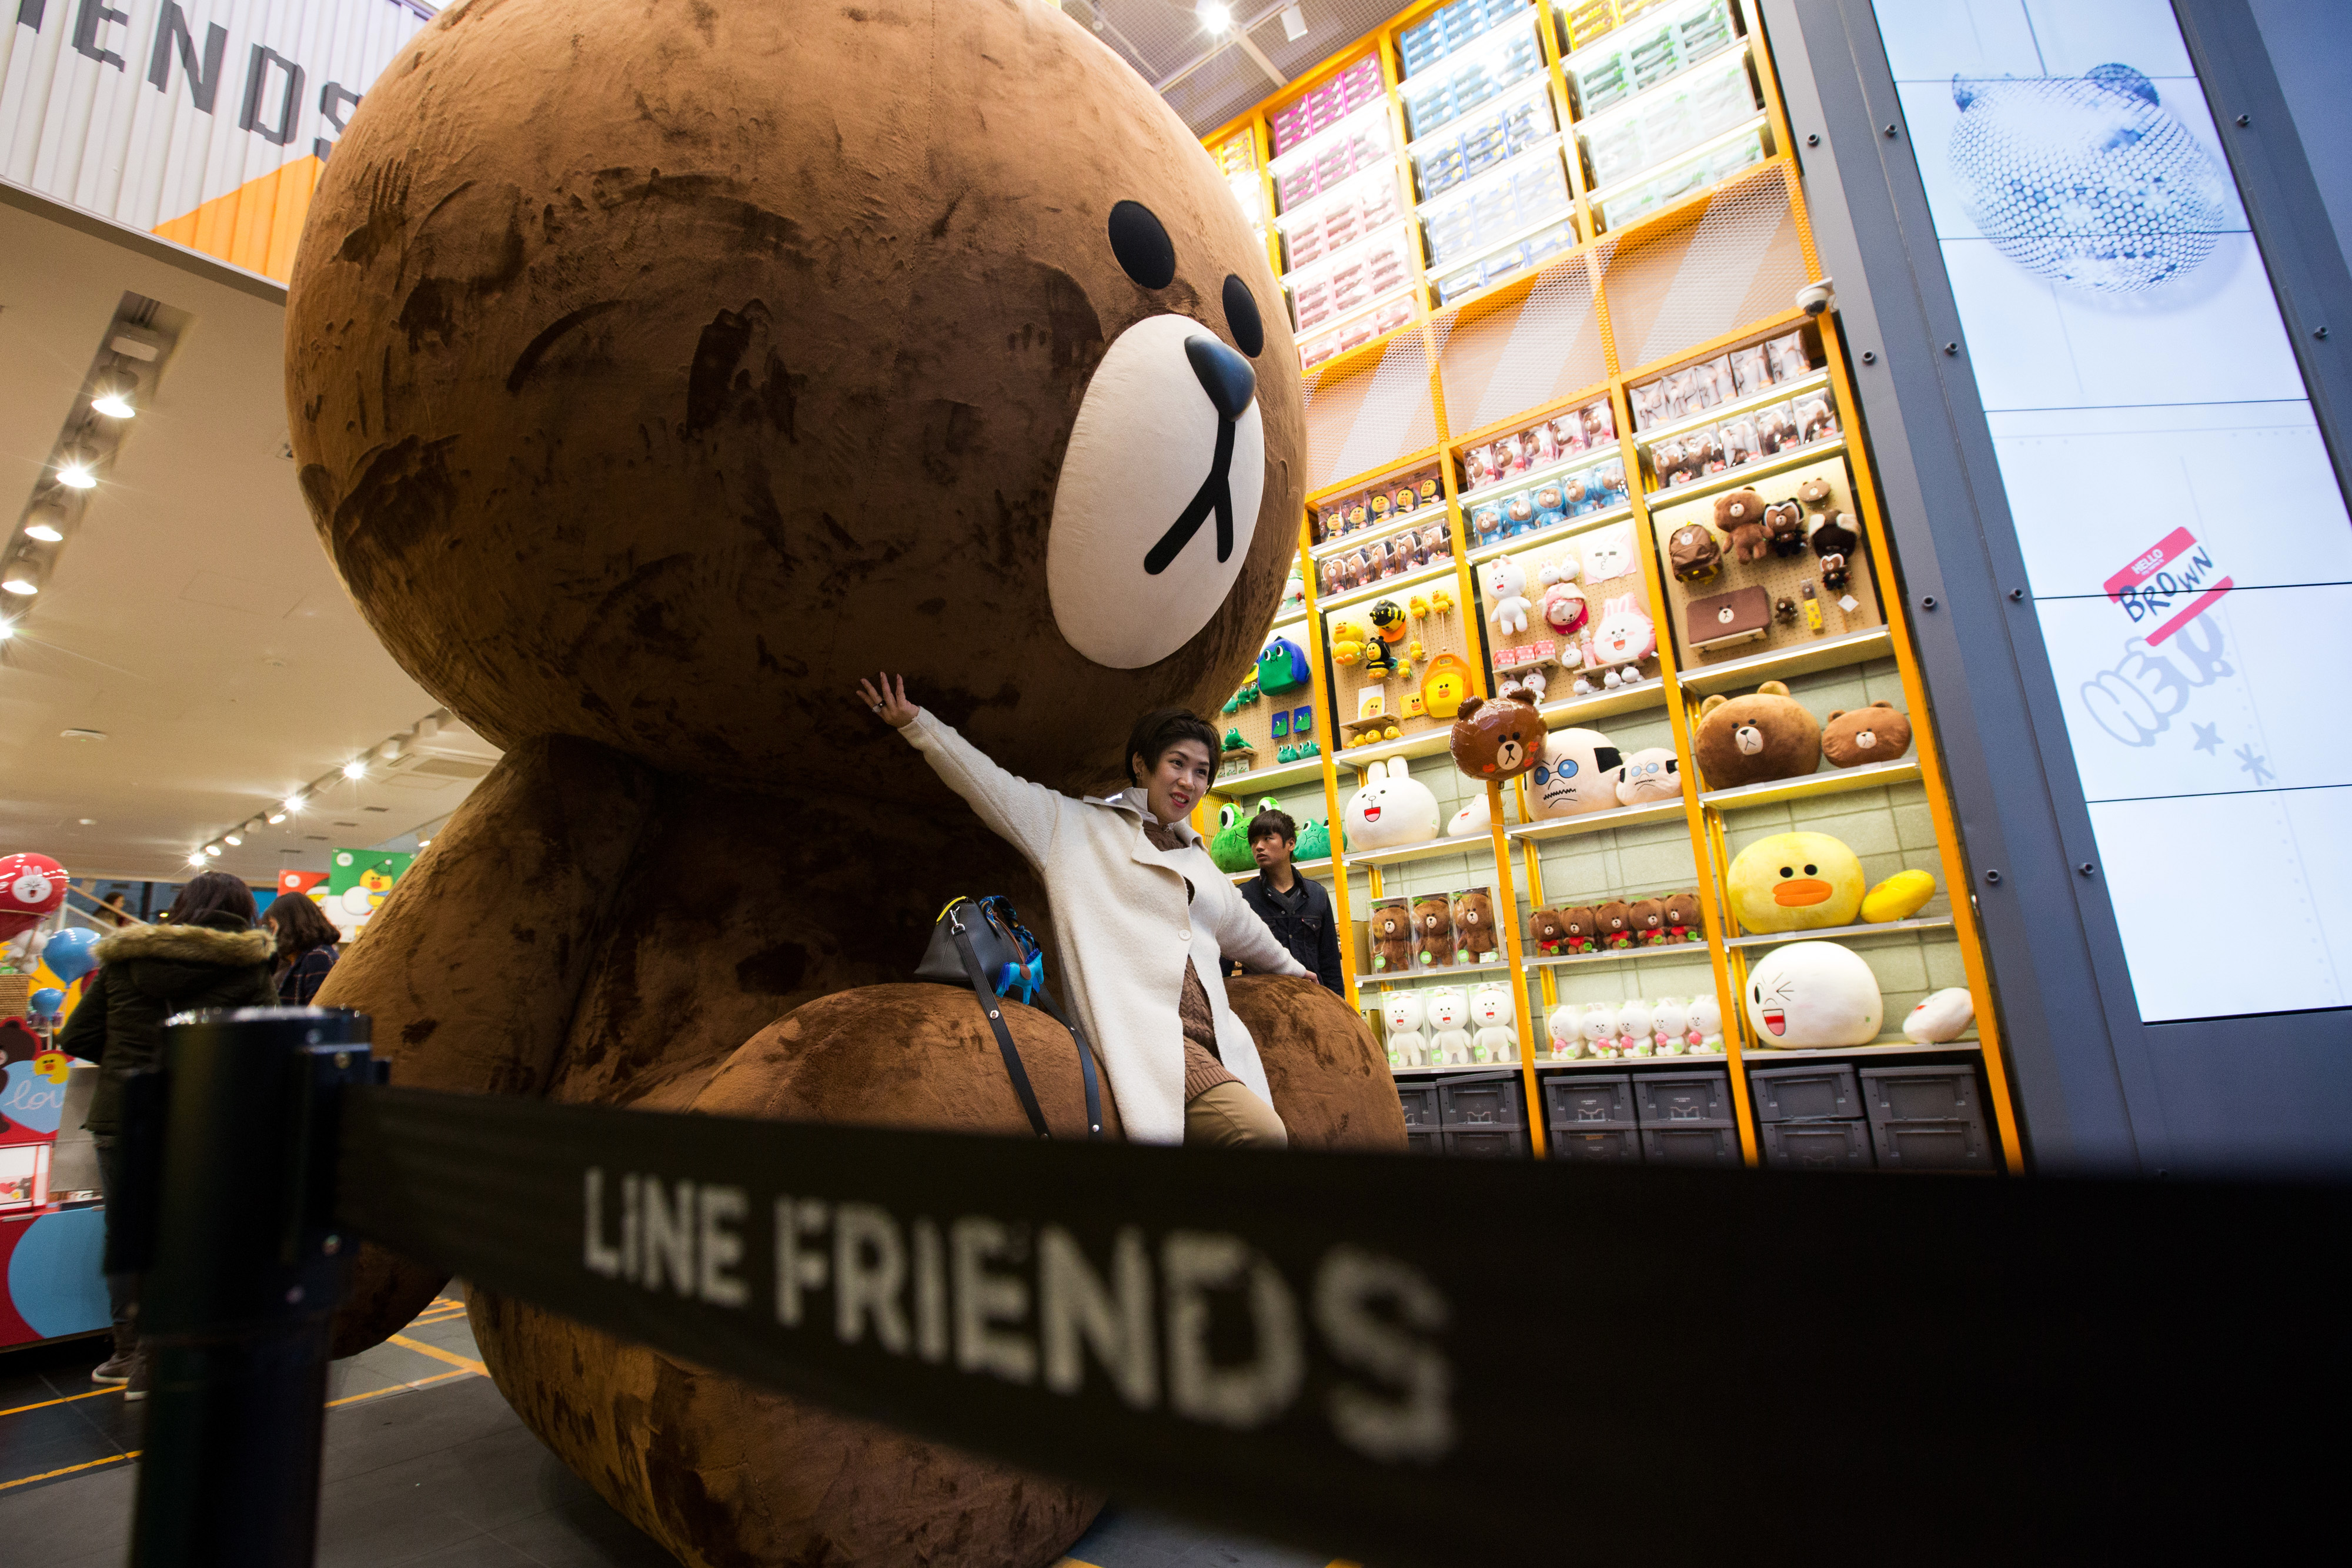 Understanding Line, the chat app behind 2016's largest tech IPO